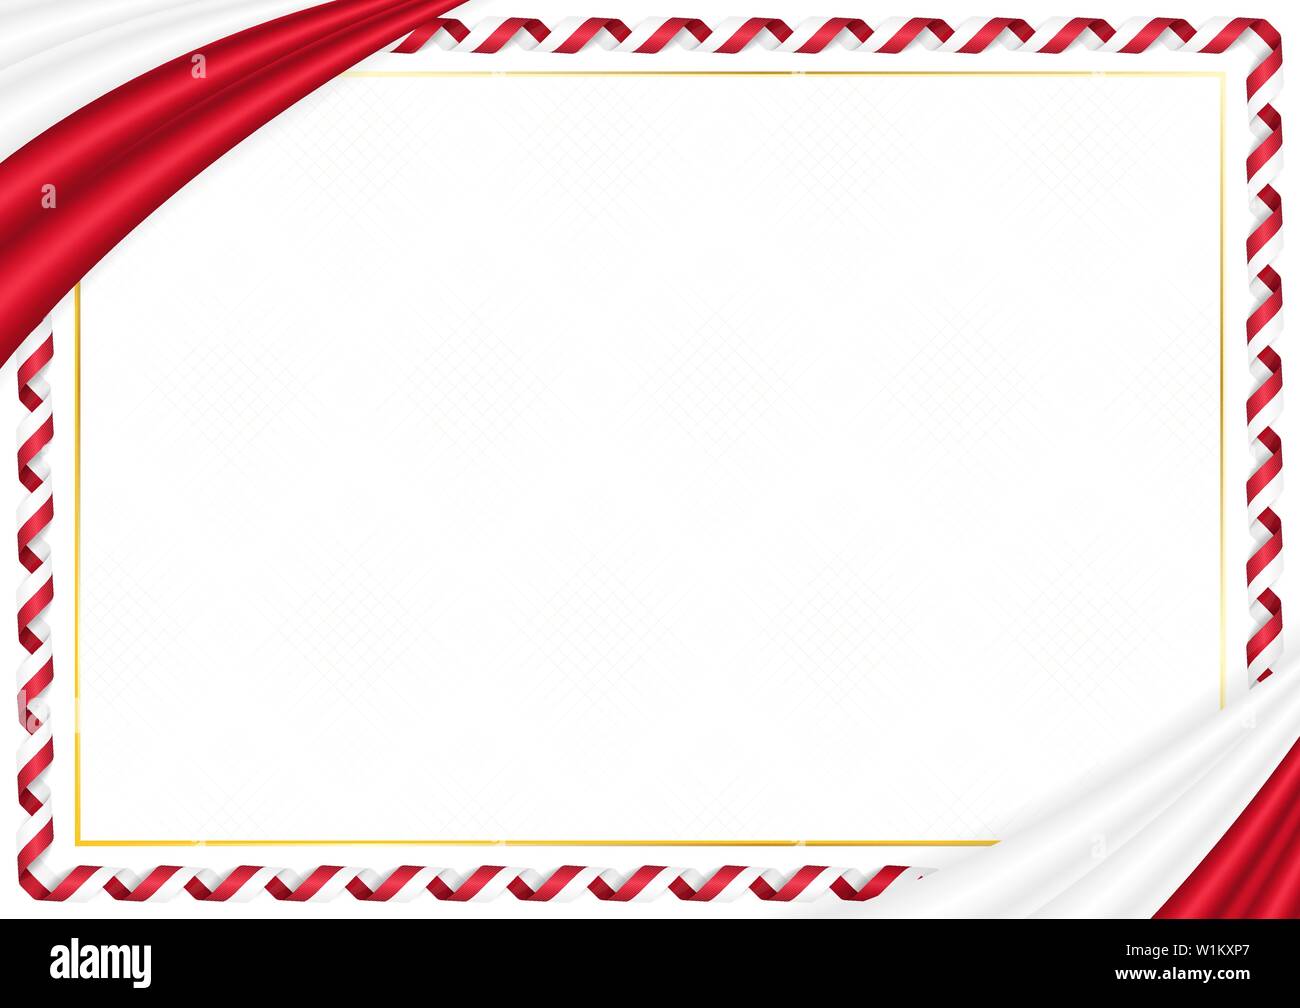 Border made with Bahrain national colors. Template elements for your ...